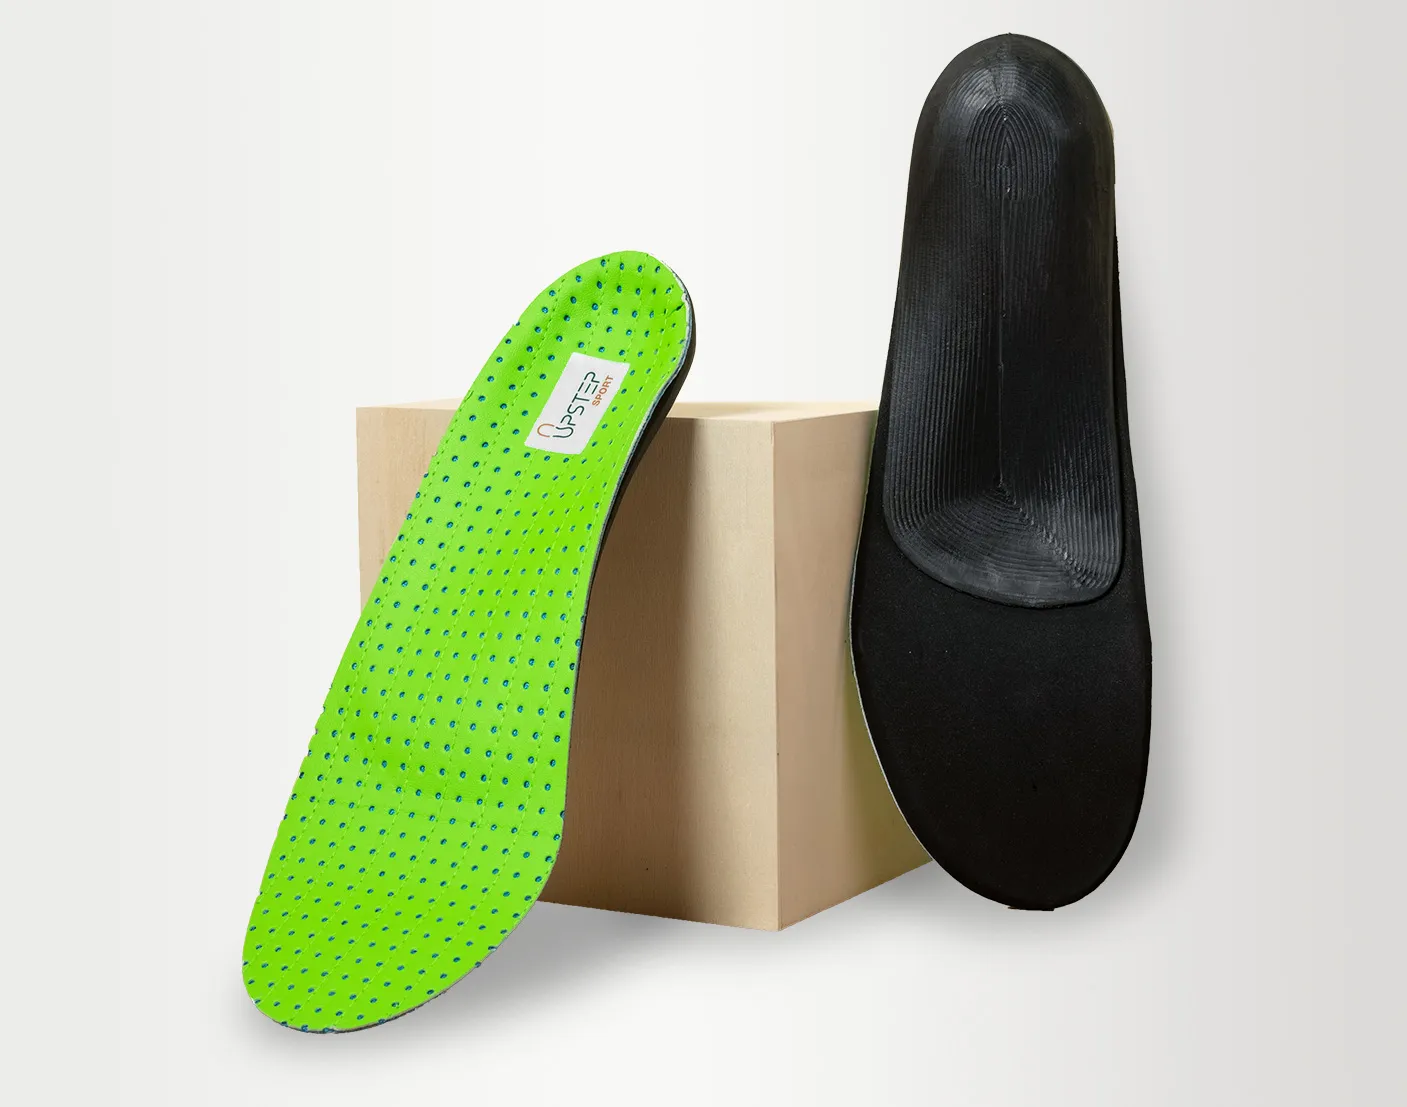 Upstep's custom supination shoe insole leaning on a box, next to a formal shoe.